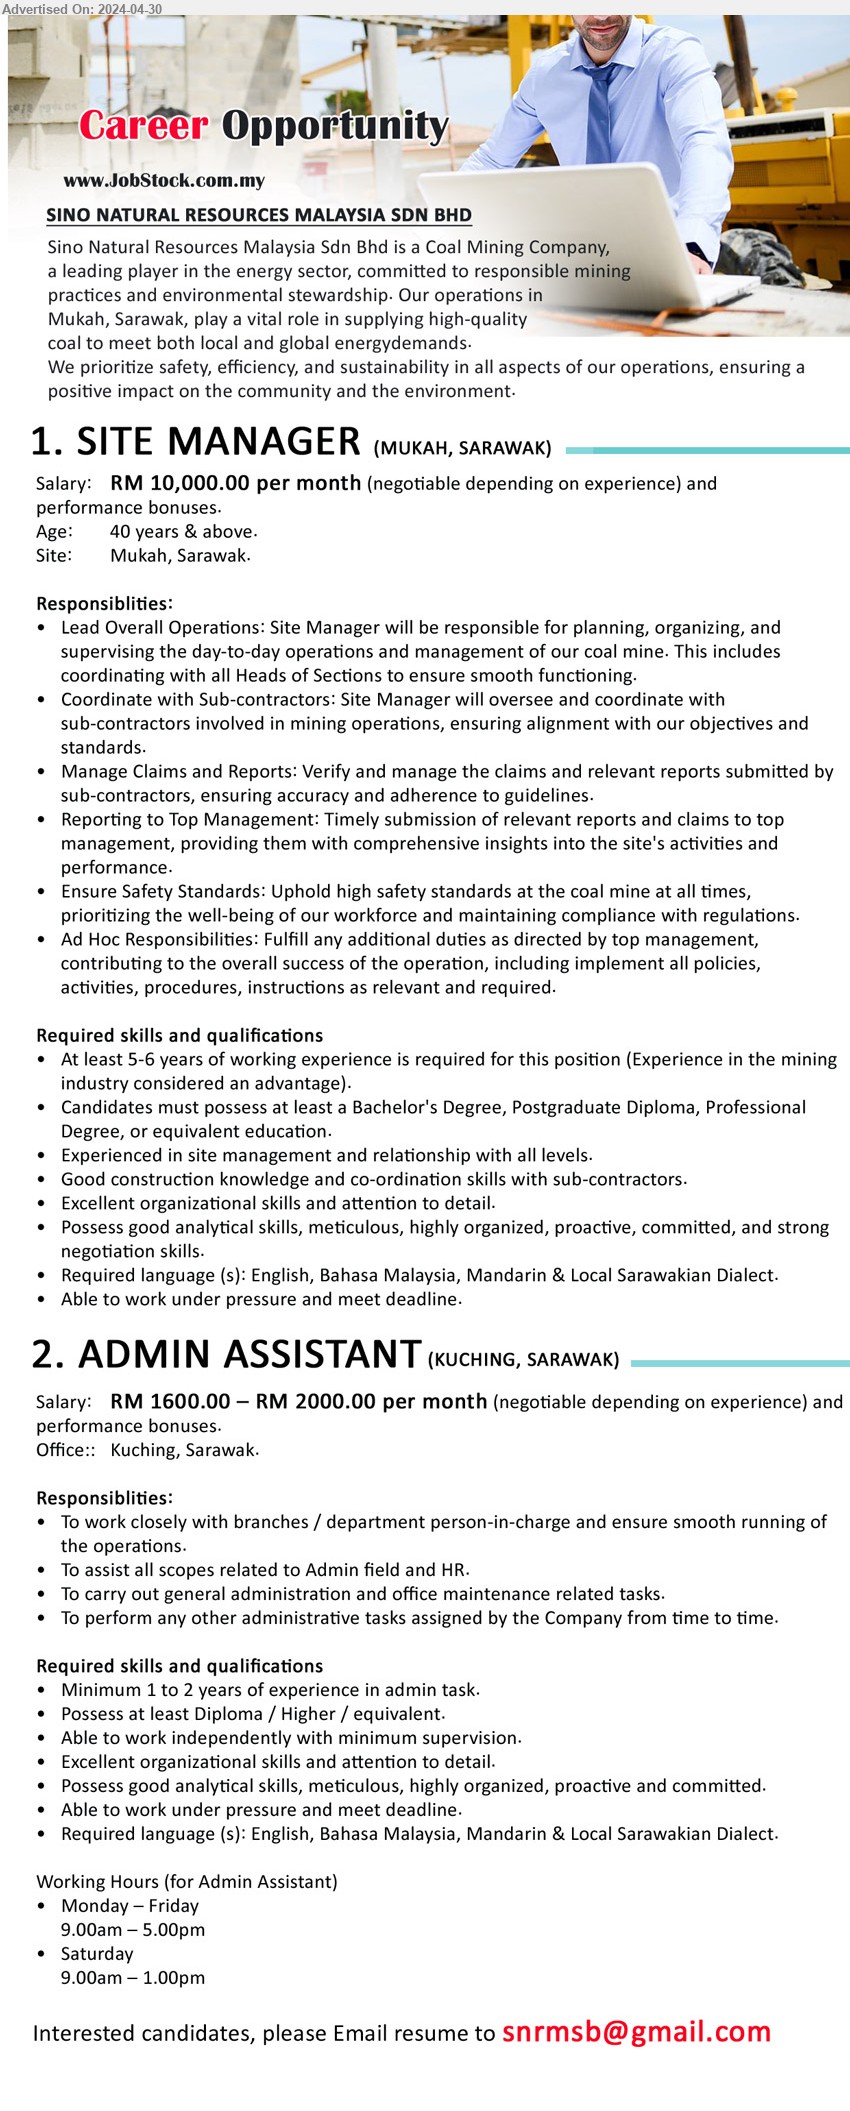 SINO NATURAL RESOURCES MALAYSIA SDN BHD - 1. SITE MANAGER (Mukah), Salary: RM 10,000.00 per month, 40 years & above, at least 5-6 yrs exp. in mining industry, Bachelor's Degree, Postgraduate Diploma, Professional Degree...
2. ADMIN ASSISTANT (Kuching), Salary: RM 1600.00 – RM 2000.00 per month, Diploma / Higher,...
Email resume to ....
